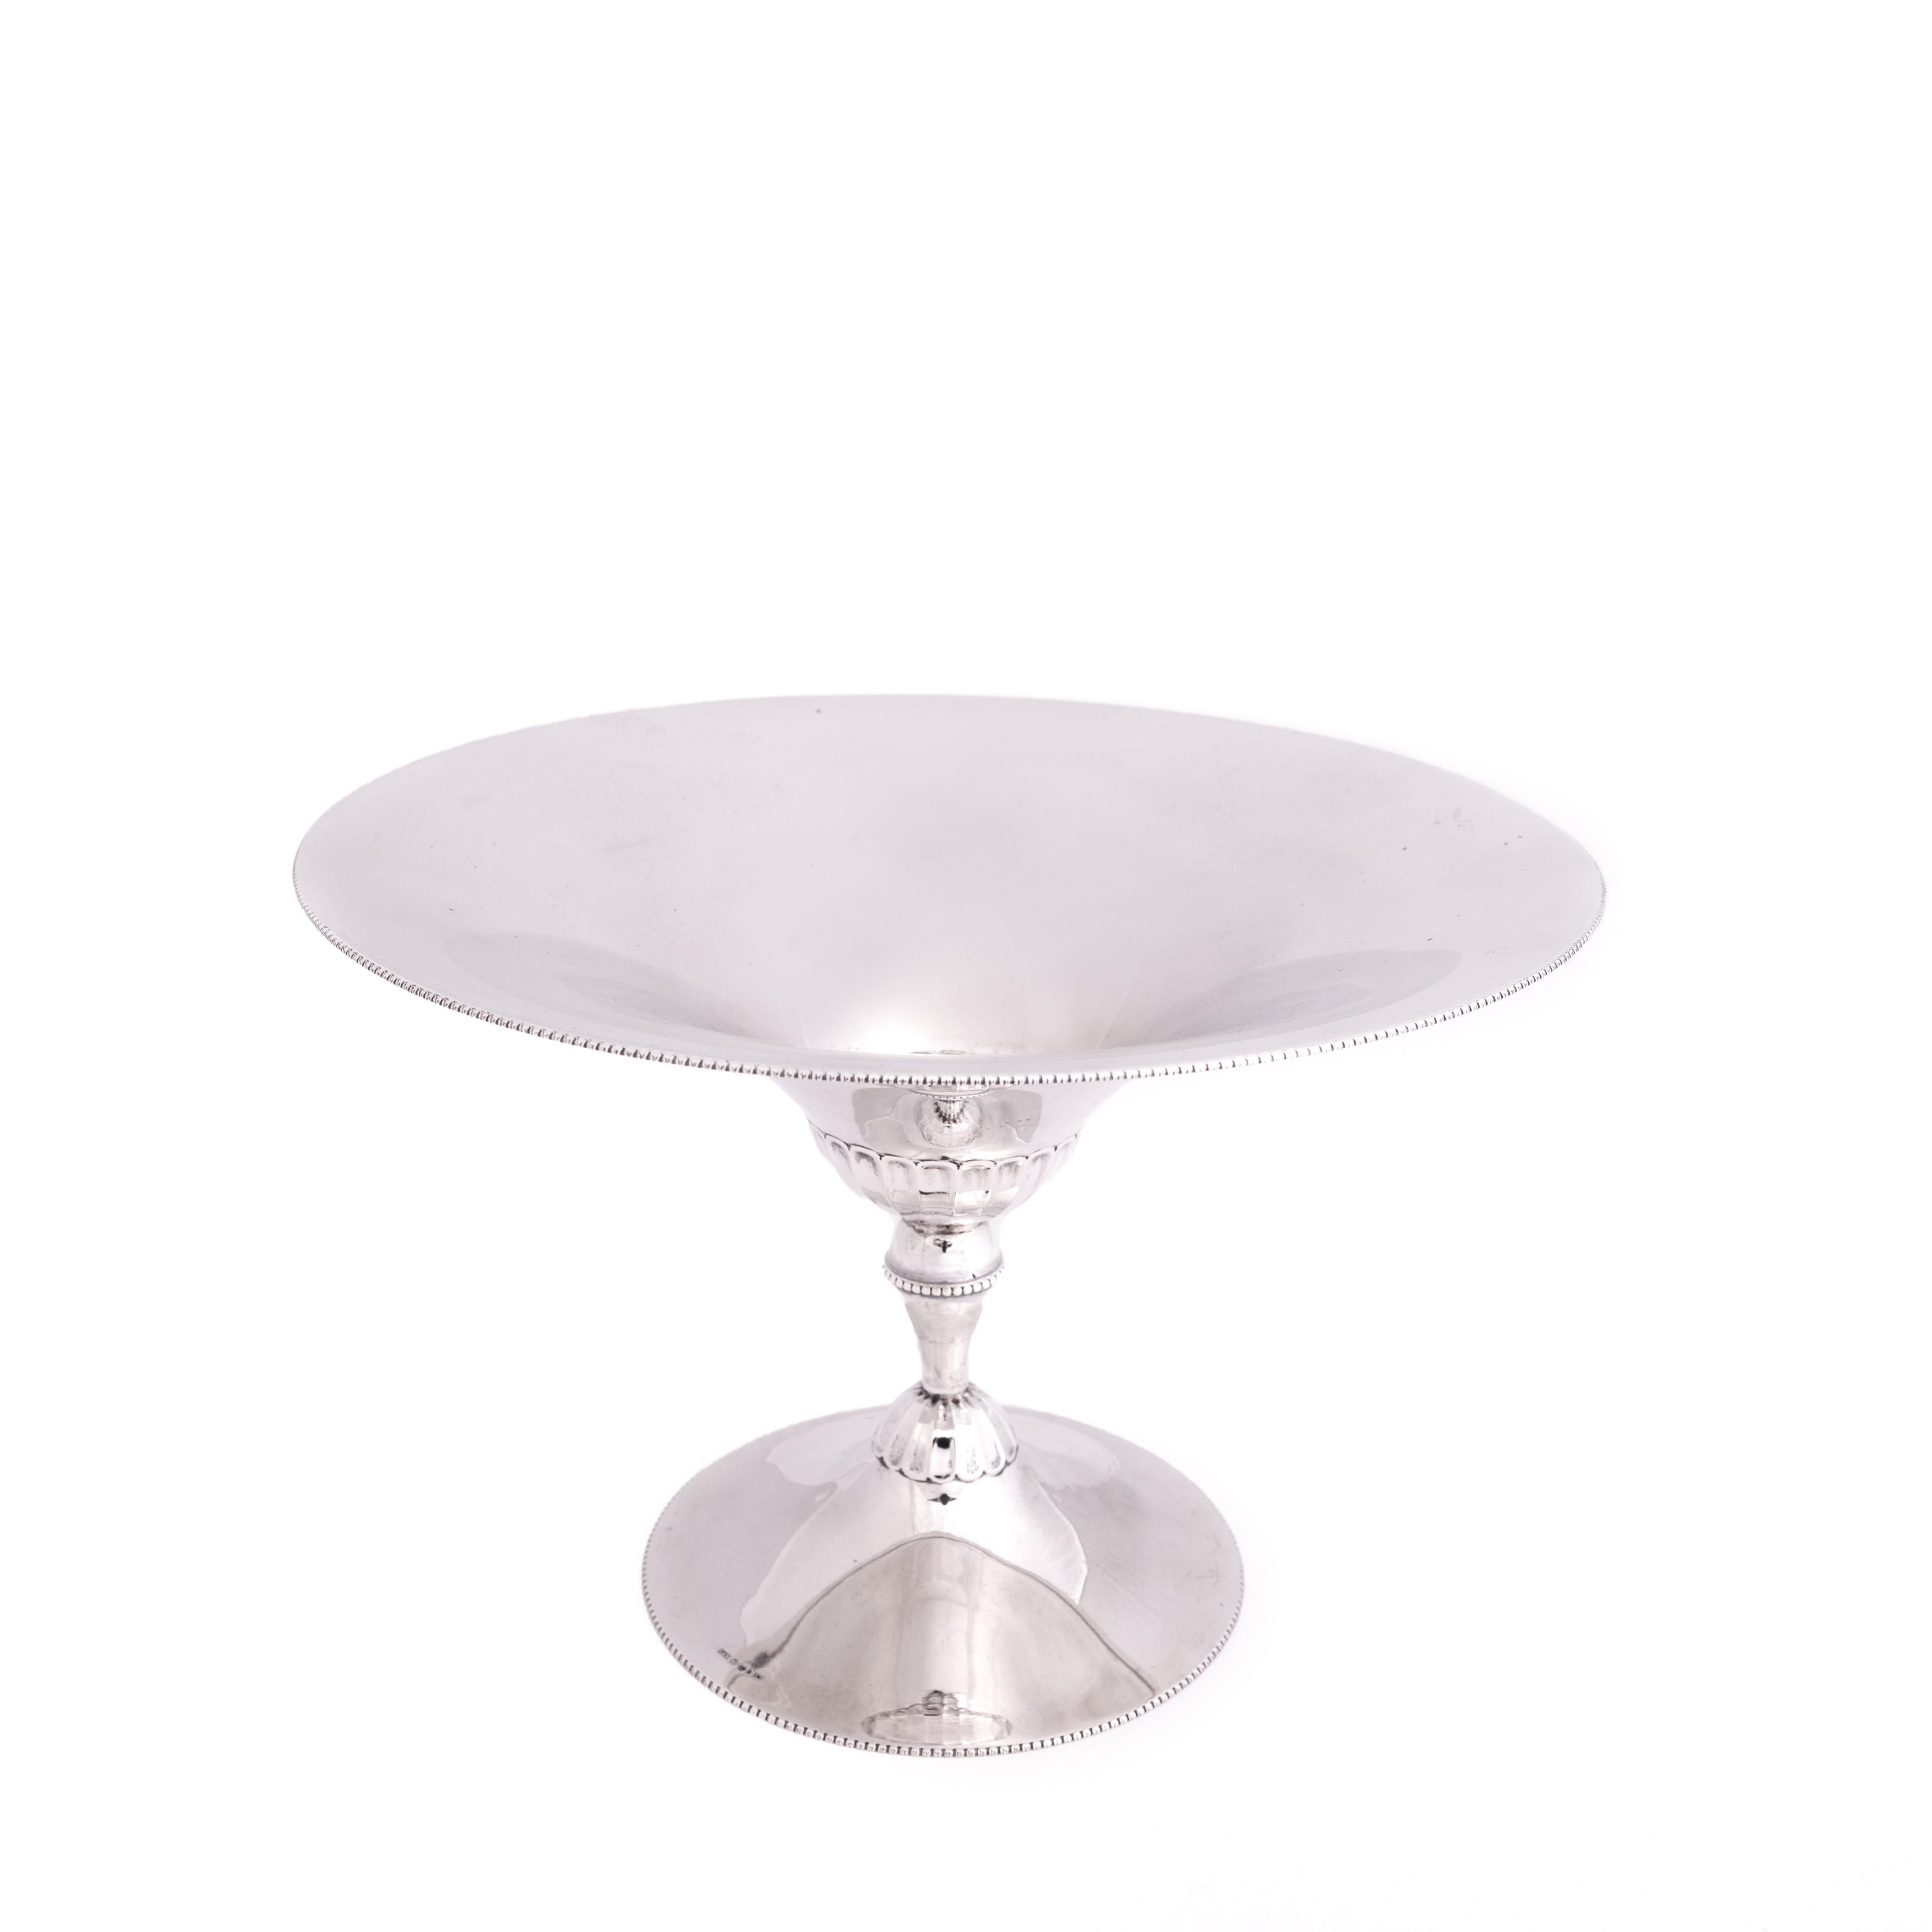 Swedish Art Déco centerpiece / bowl 925 Sterling Silver, Gothenburg 1920s

The puristic and light-footed bowl from the 1920s Sweden captivates with its delicacy and floating character.
The smooth, slightly domed foot decorated with a small beaded